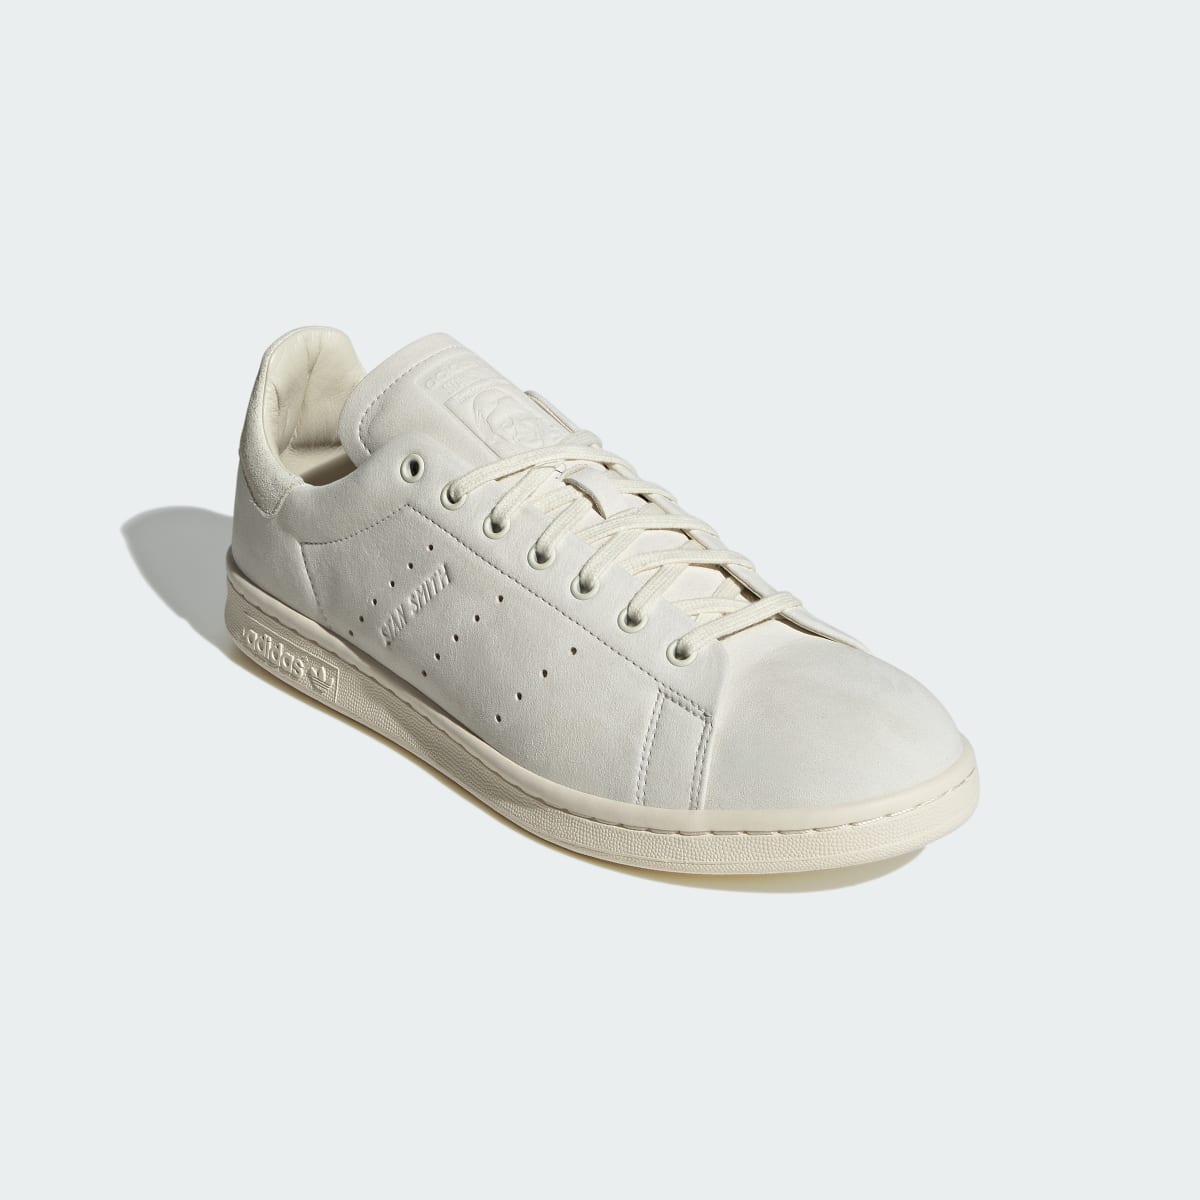 Adidas Stan Smith Lux Shoes. 5